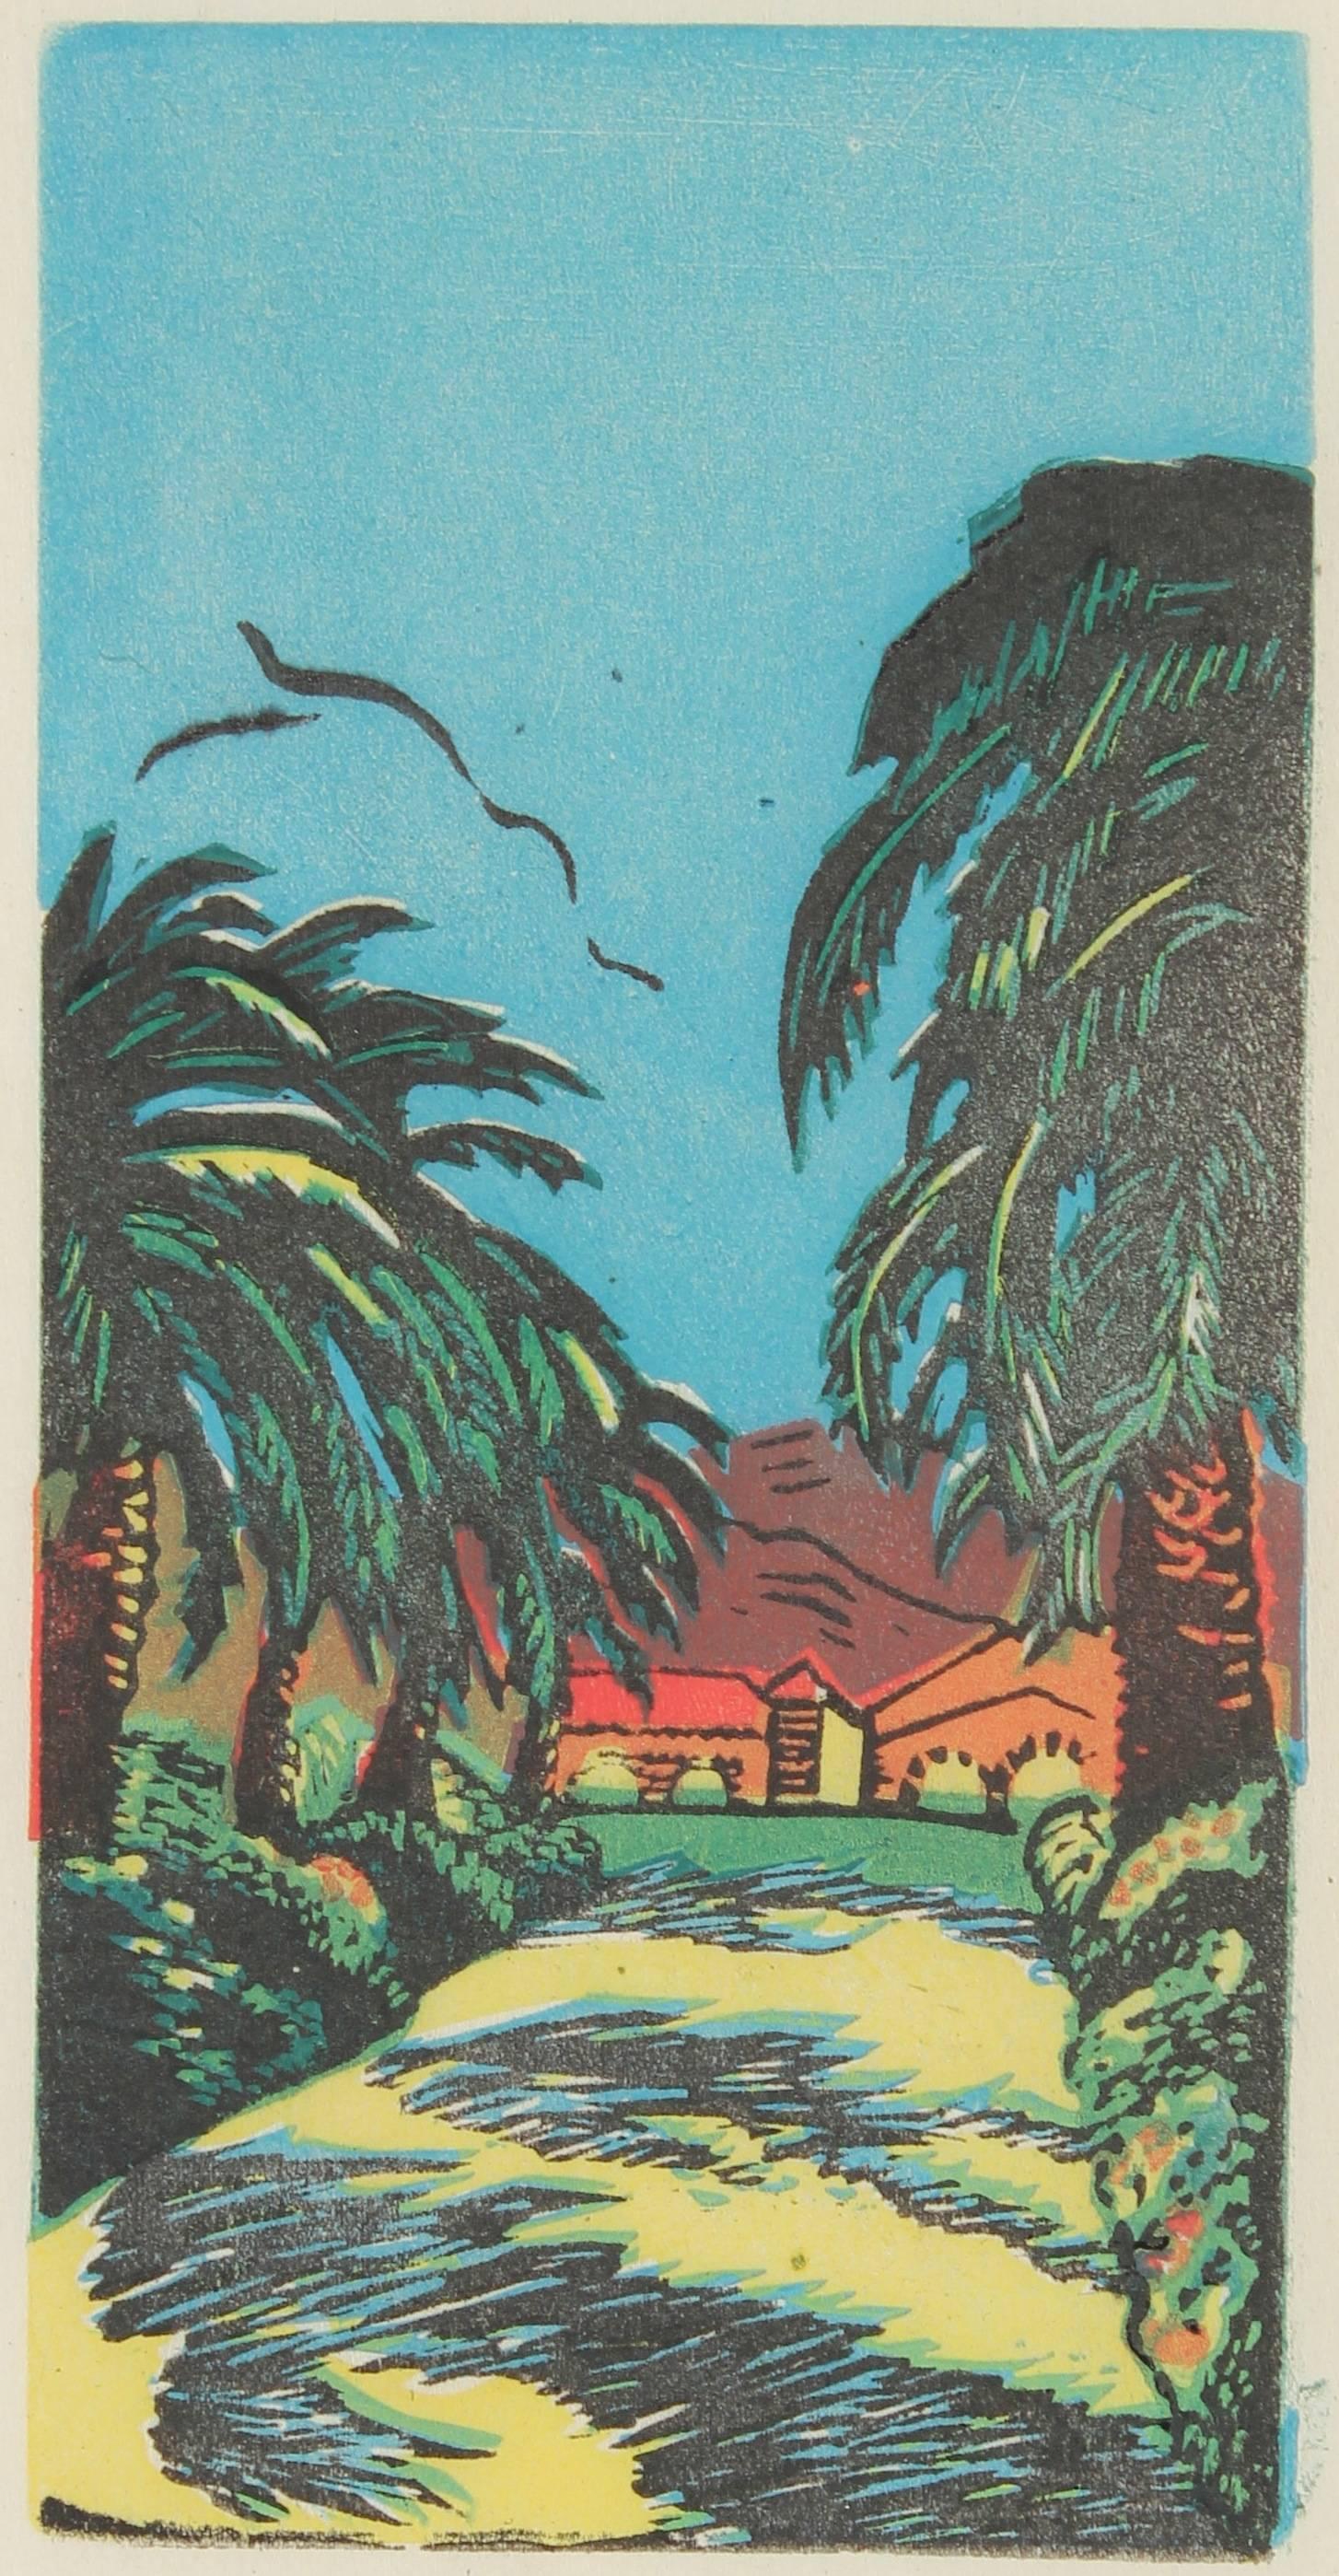 Mary Watterick Evans Landscape Print - Colorful Bay Area Ranch with California Palm Trees, Linocut, Circa 1940s